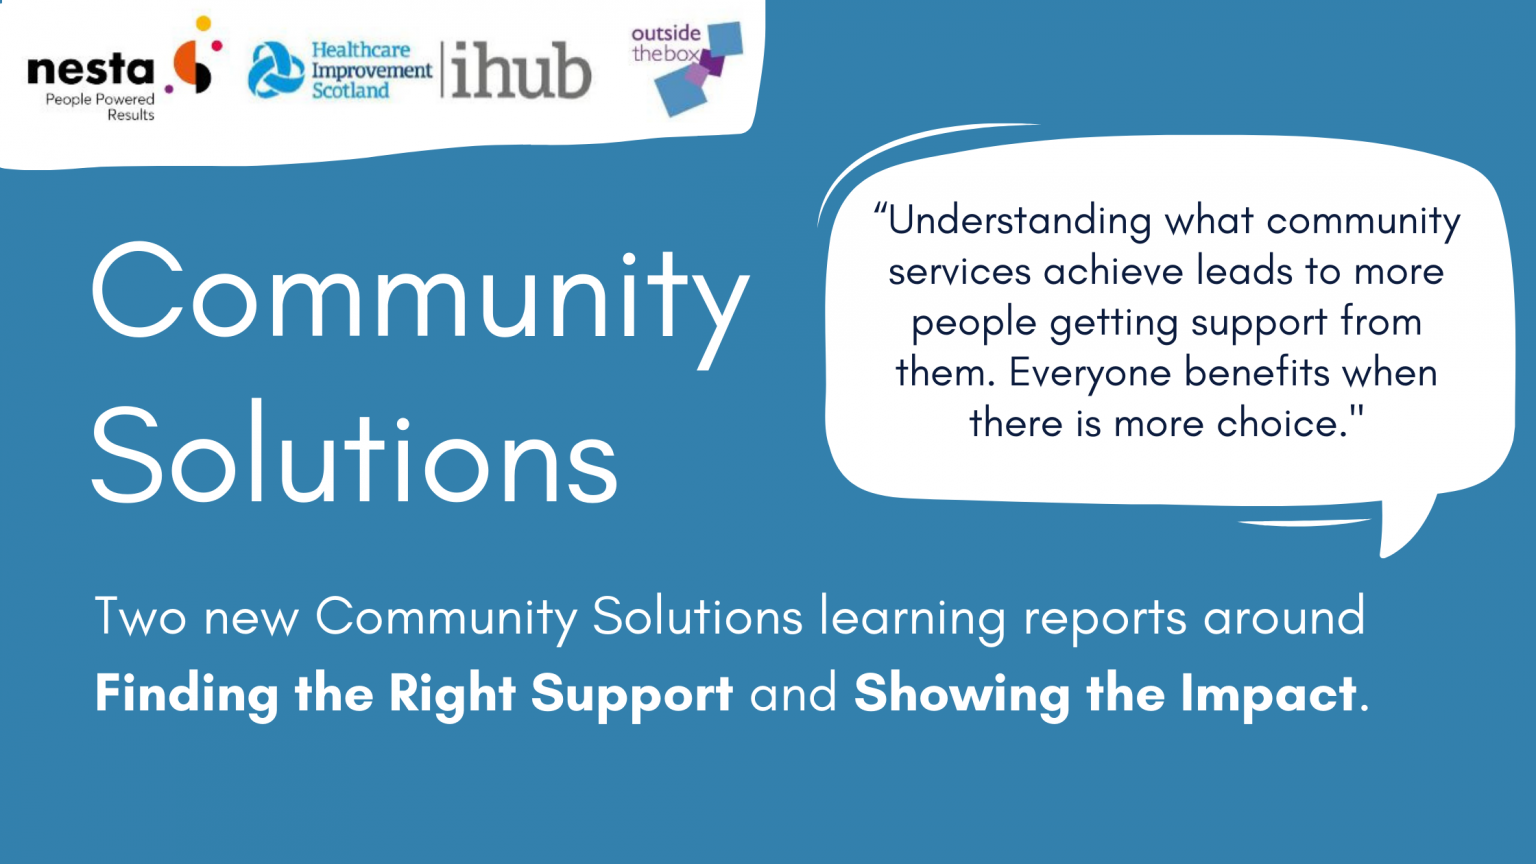 Community Solutions. Two community solutions learning reports on Finding the right support, and Showing the Impact. "Understanding what community services achieve leads to more people getting support from them. Everyone benefits when there is more choice."